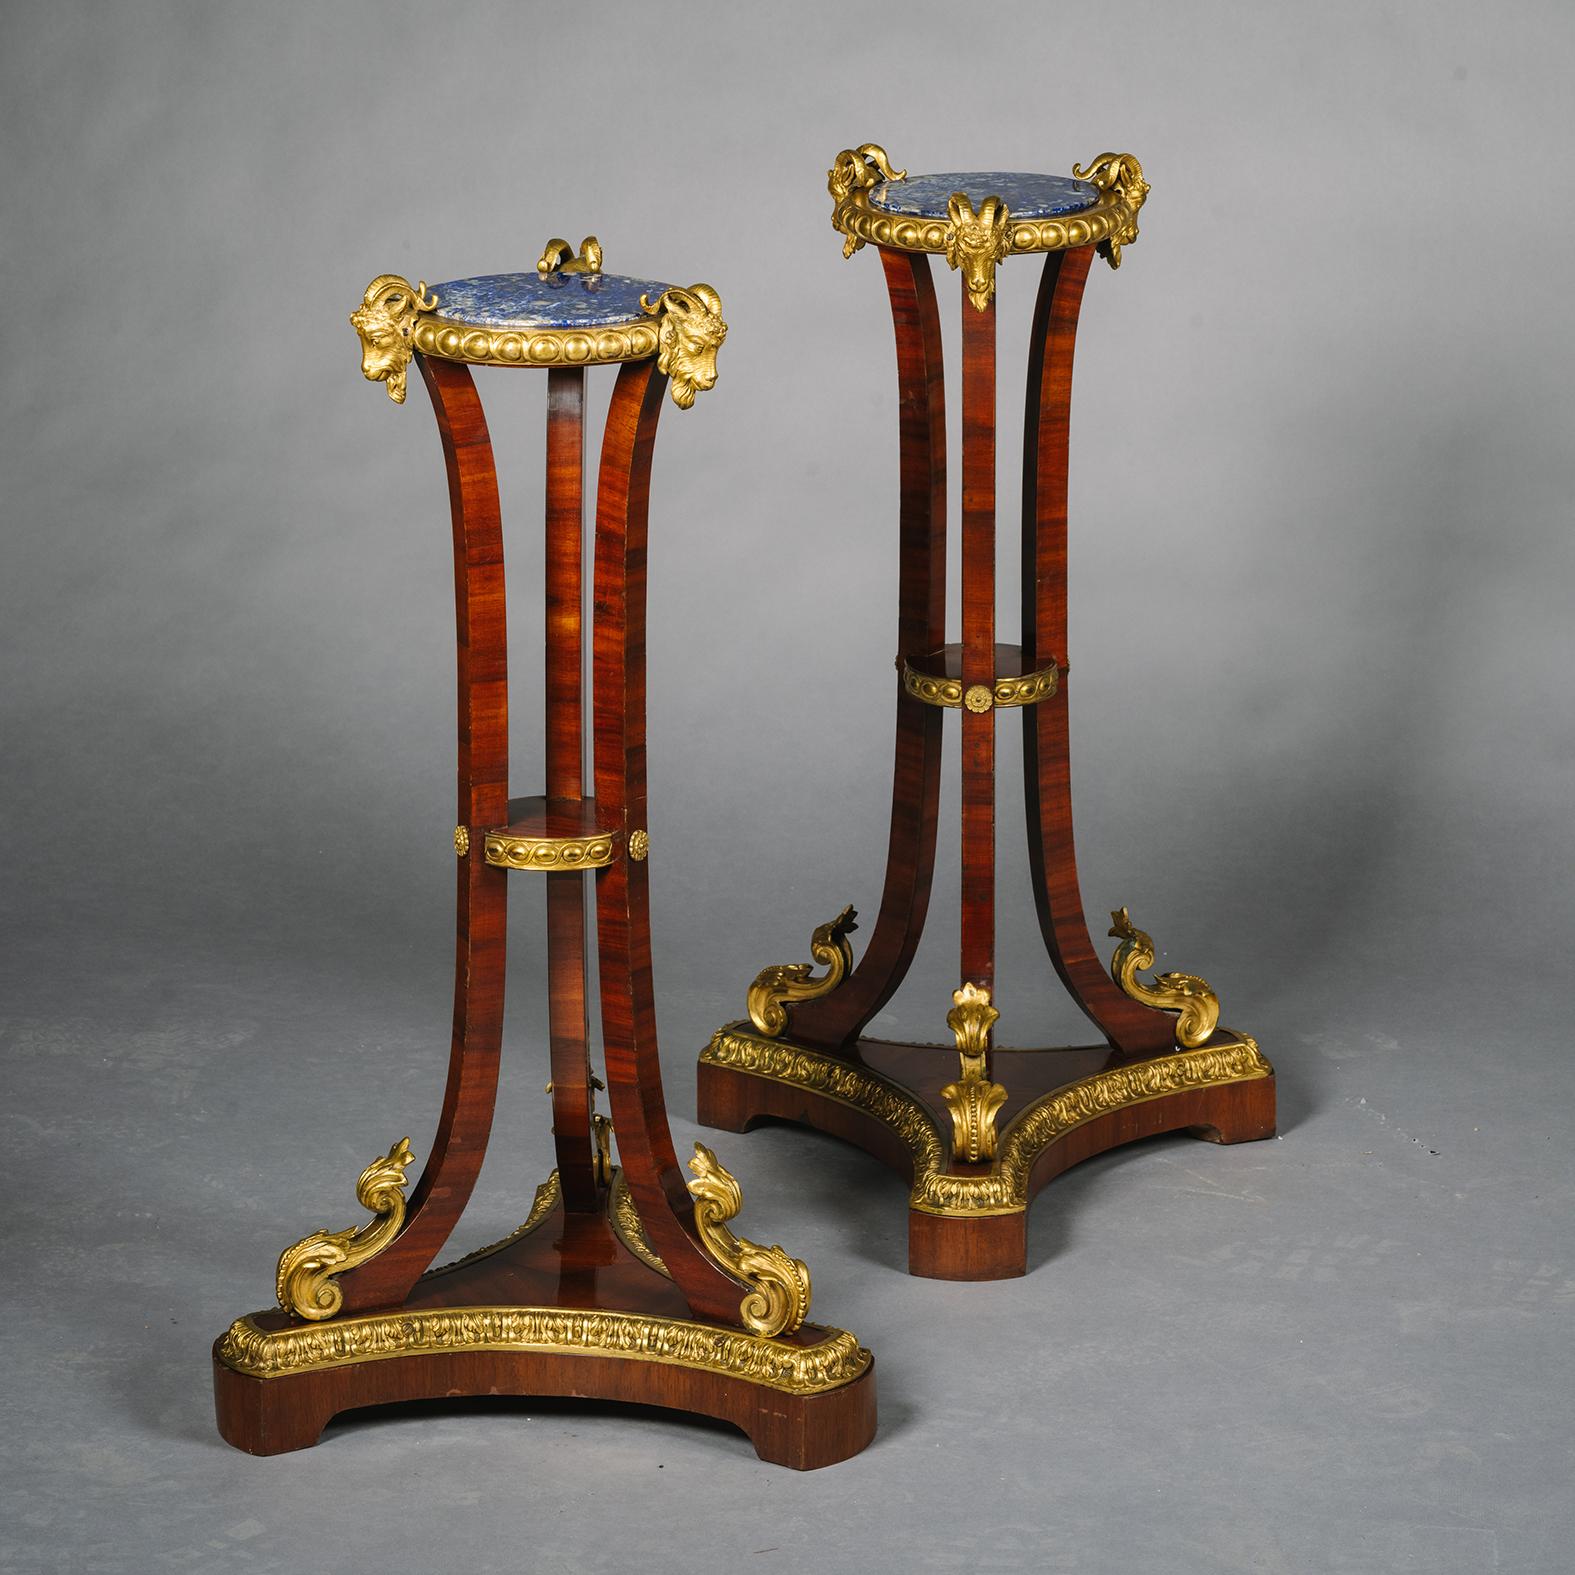 A Pair of Fine and Unusual Louis Philippe Period Gilt-Bronze, Mahogany and Lapis Lazuli Guéridons or Jardinière Stands.

Each with circular Lapis Lazil top with guilloche cast frieze. Supported on three curved legs heads by rams’ masks and joined by